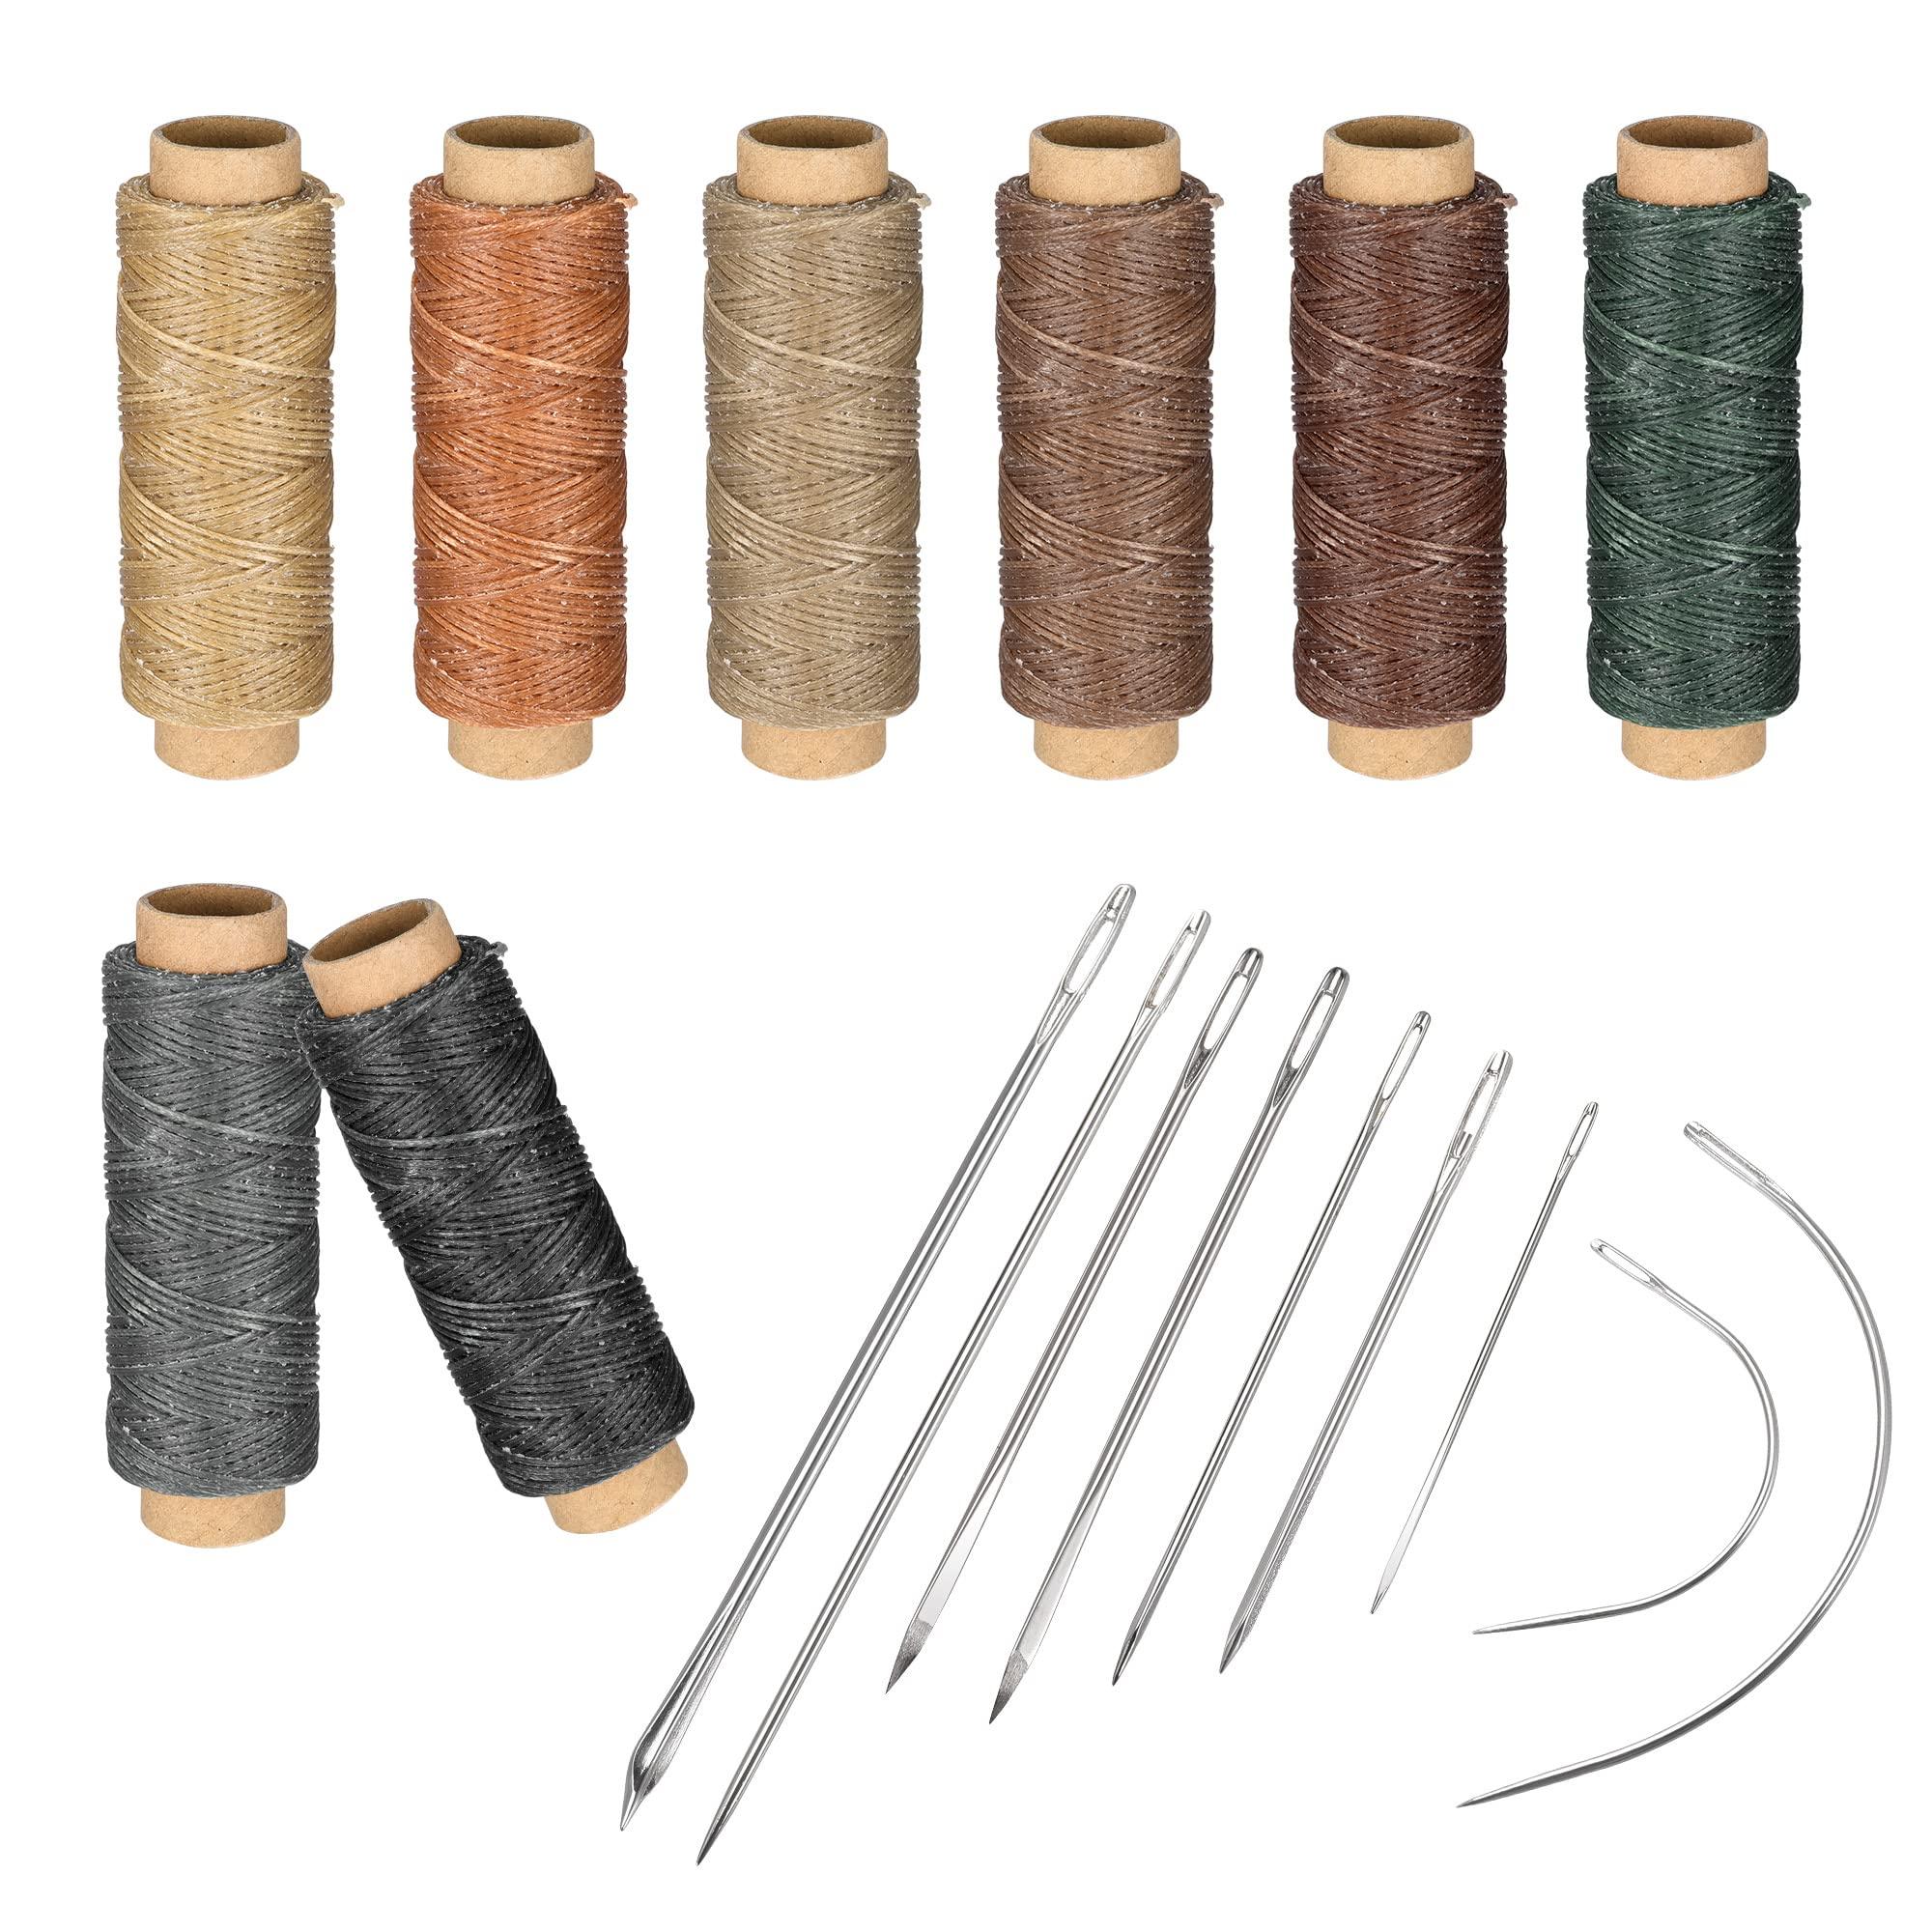 sourcing map Leather Sewing Threads Hand Stitching Tools Kit, Includes 8 Colors Waxed Flat Cord, Sewing Needles, Stitching Awls, Thimble 2